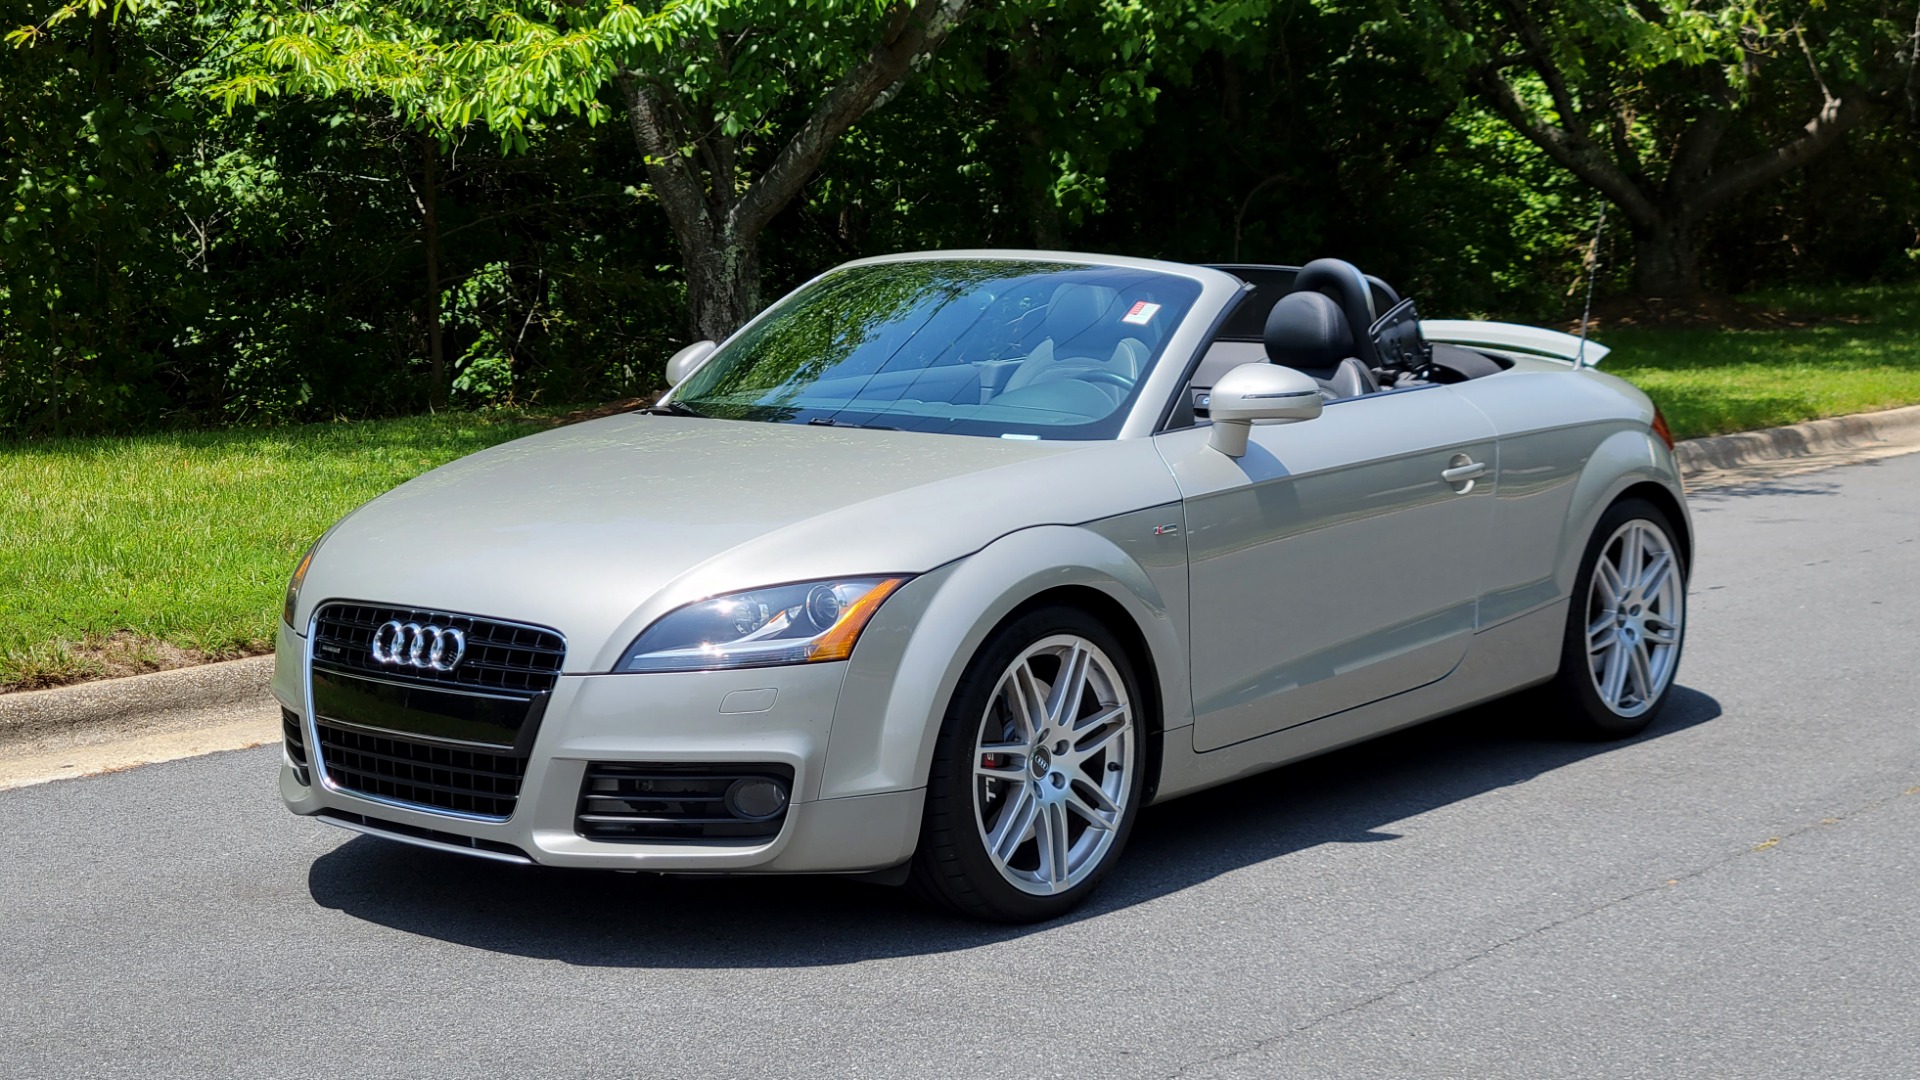 Used 2008 Audi TT 3.2L CONVERTIBLE / MANUAL / 19IN WHEELS / LOW MILES for sale Sold at Formula Imports in Charlotte NC 28227 13